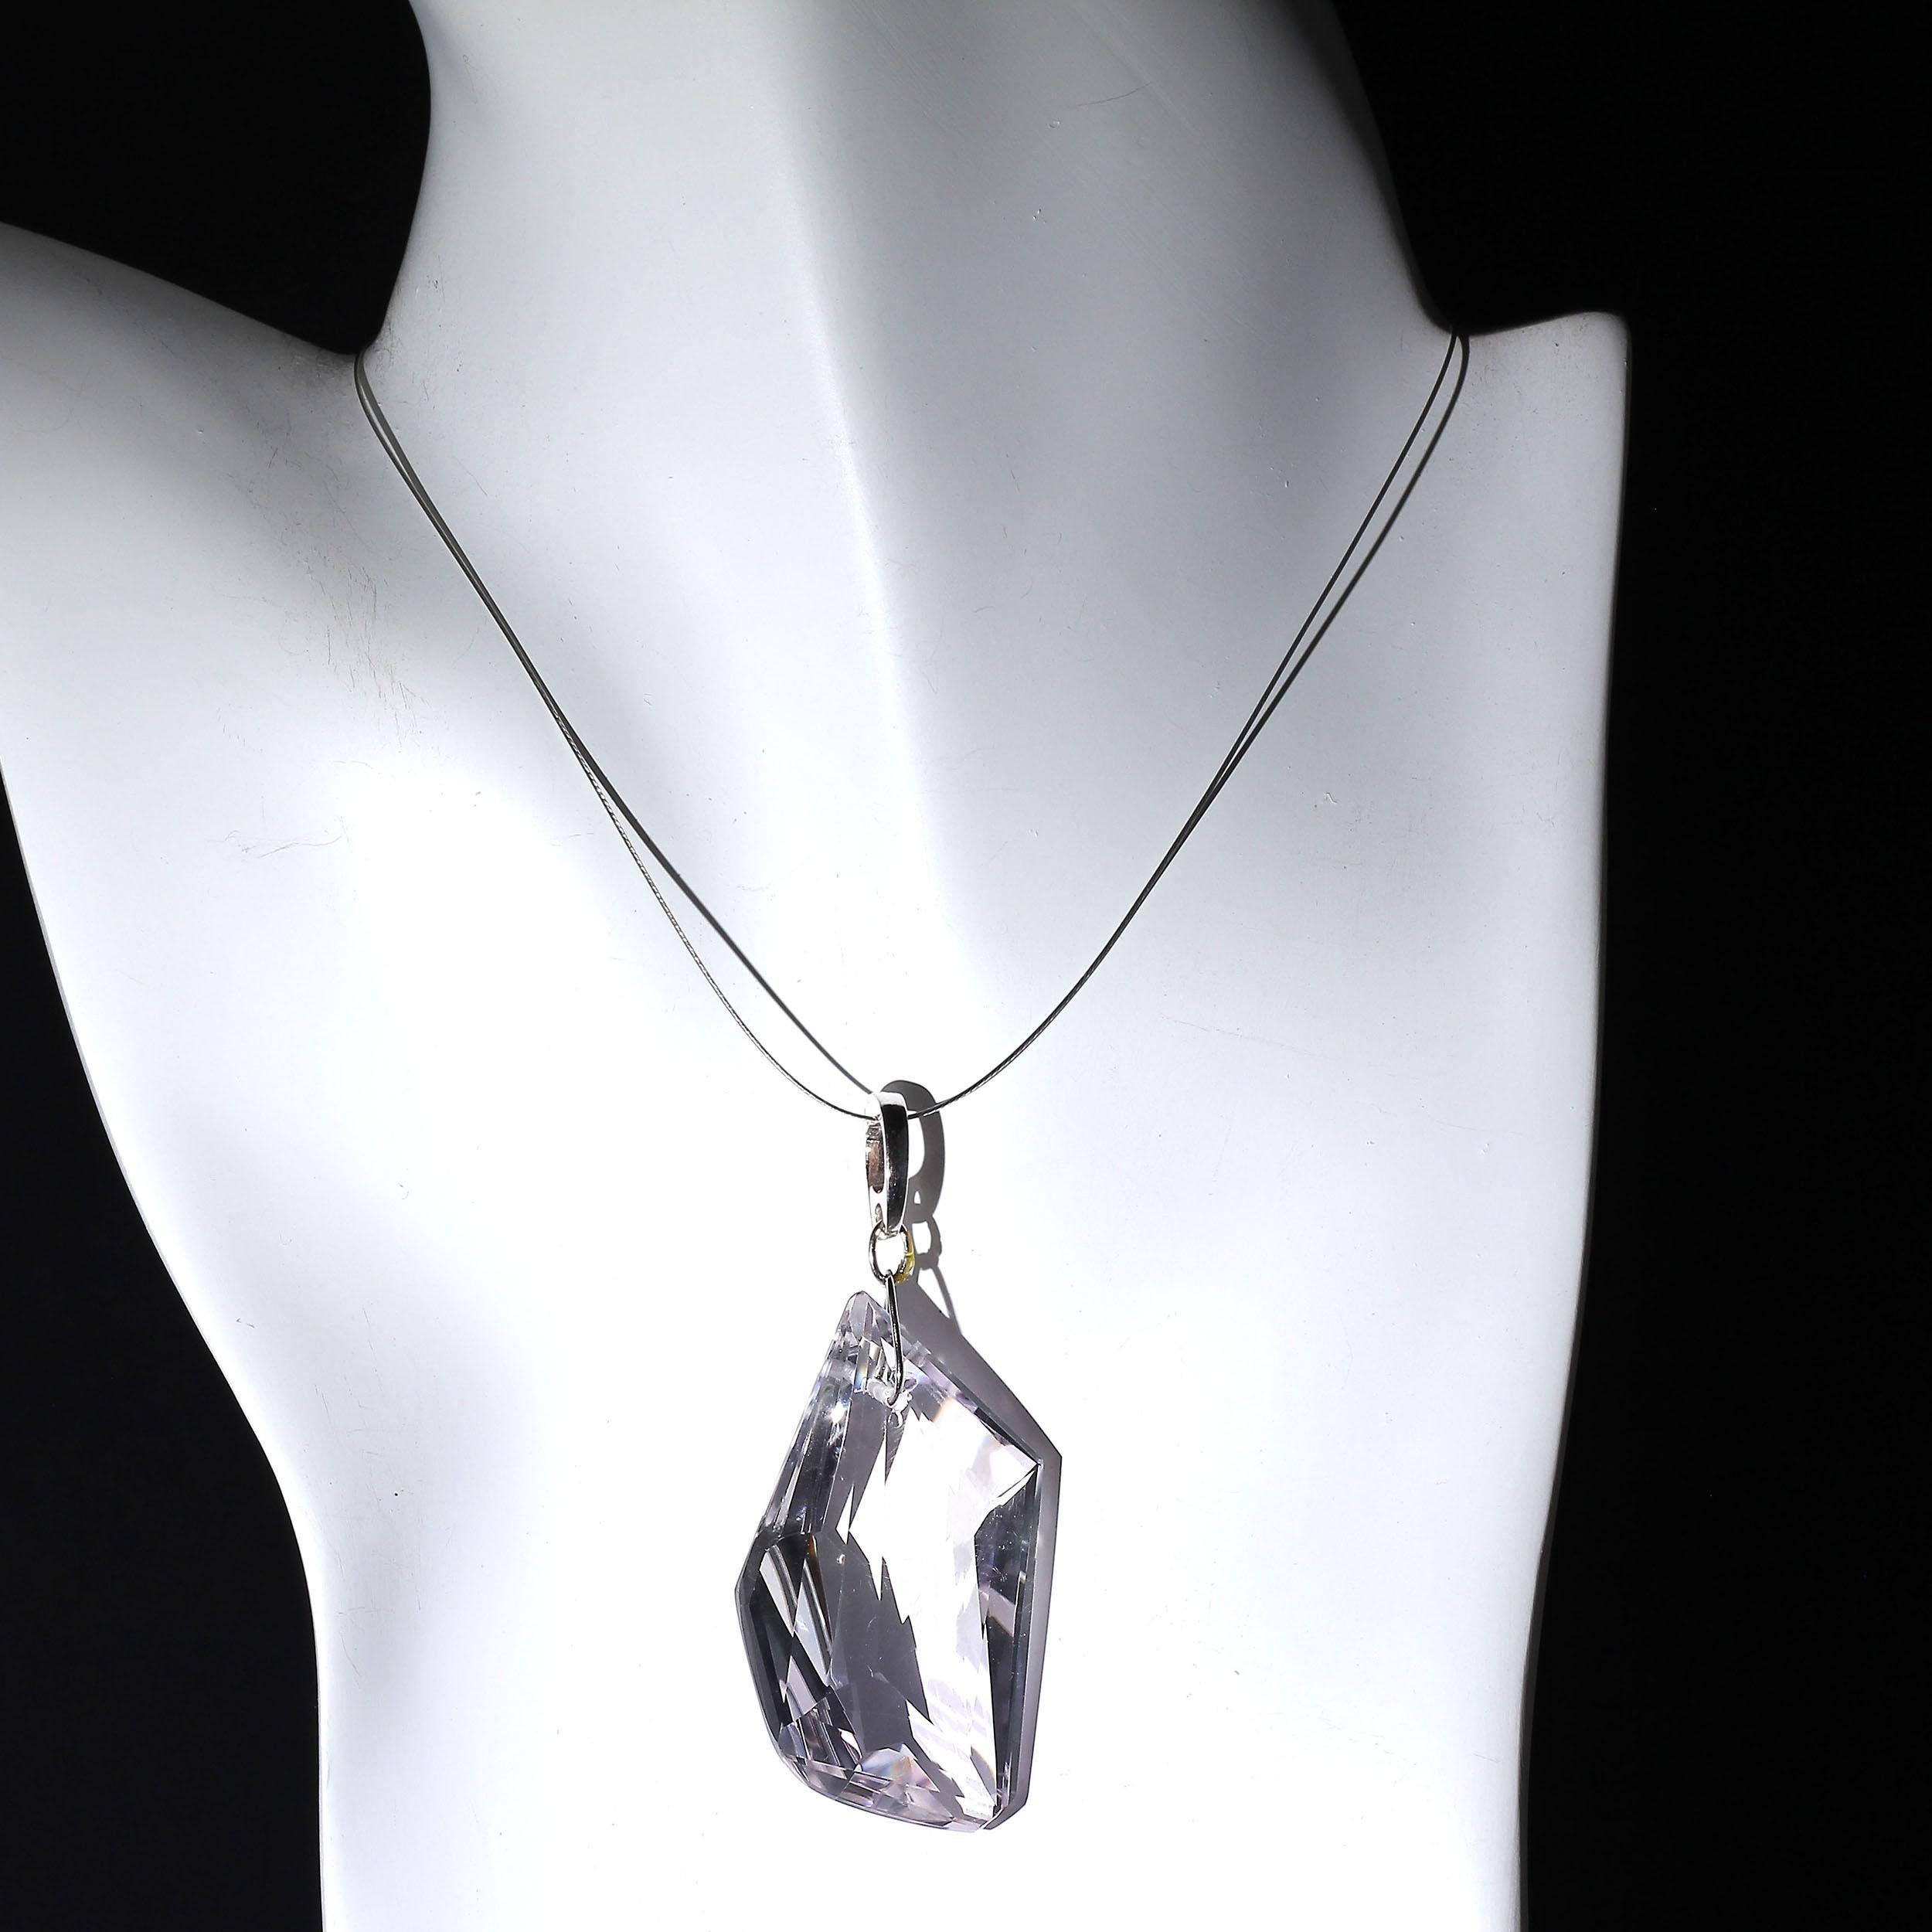 Just under 100 Carats of Brazilian Rose of France ( soft lilac Quartz) Crystal Pendant faceted in a unique free form shape. It has just the slightest tinge of purple tone. Leave it to the Brazilians to fashion such a beautiful pendant from one of